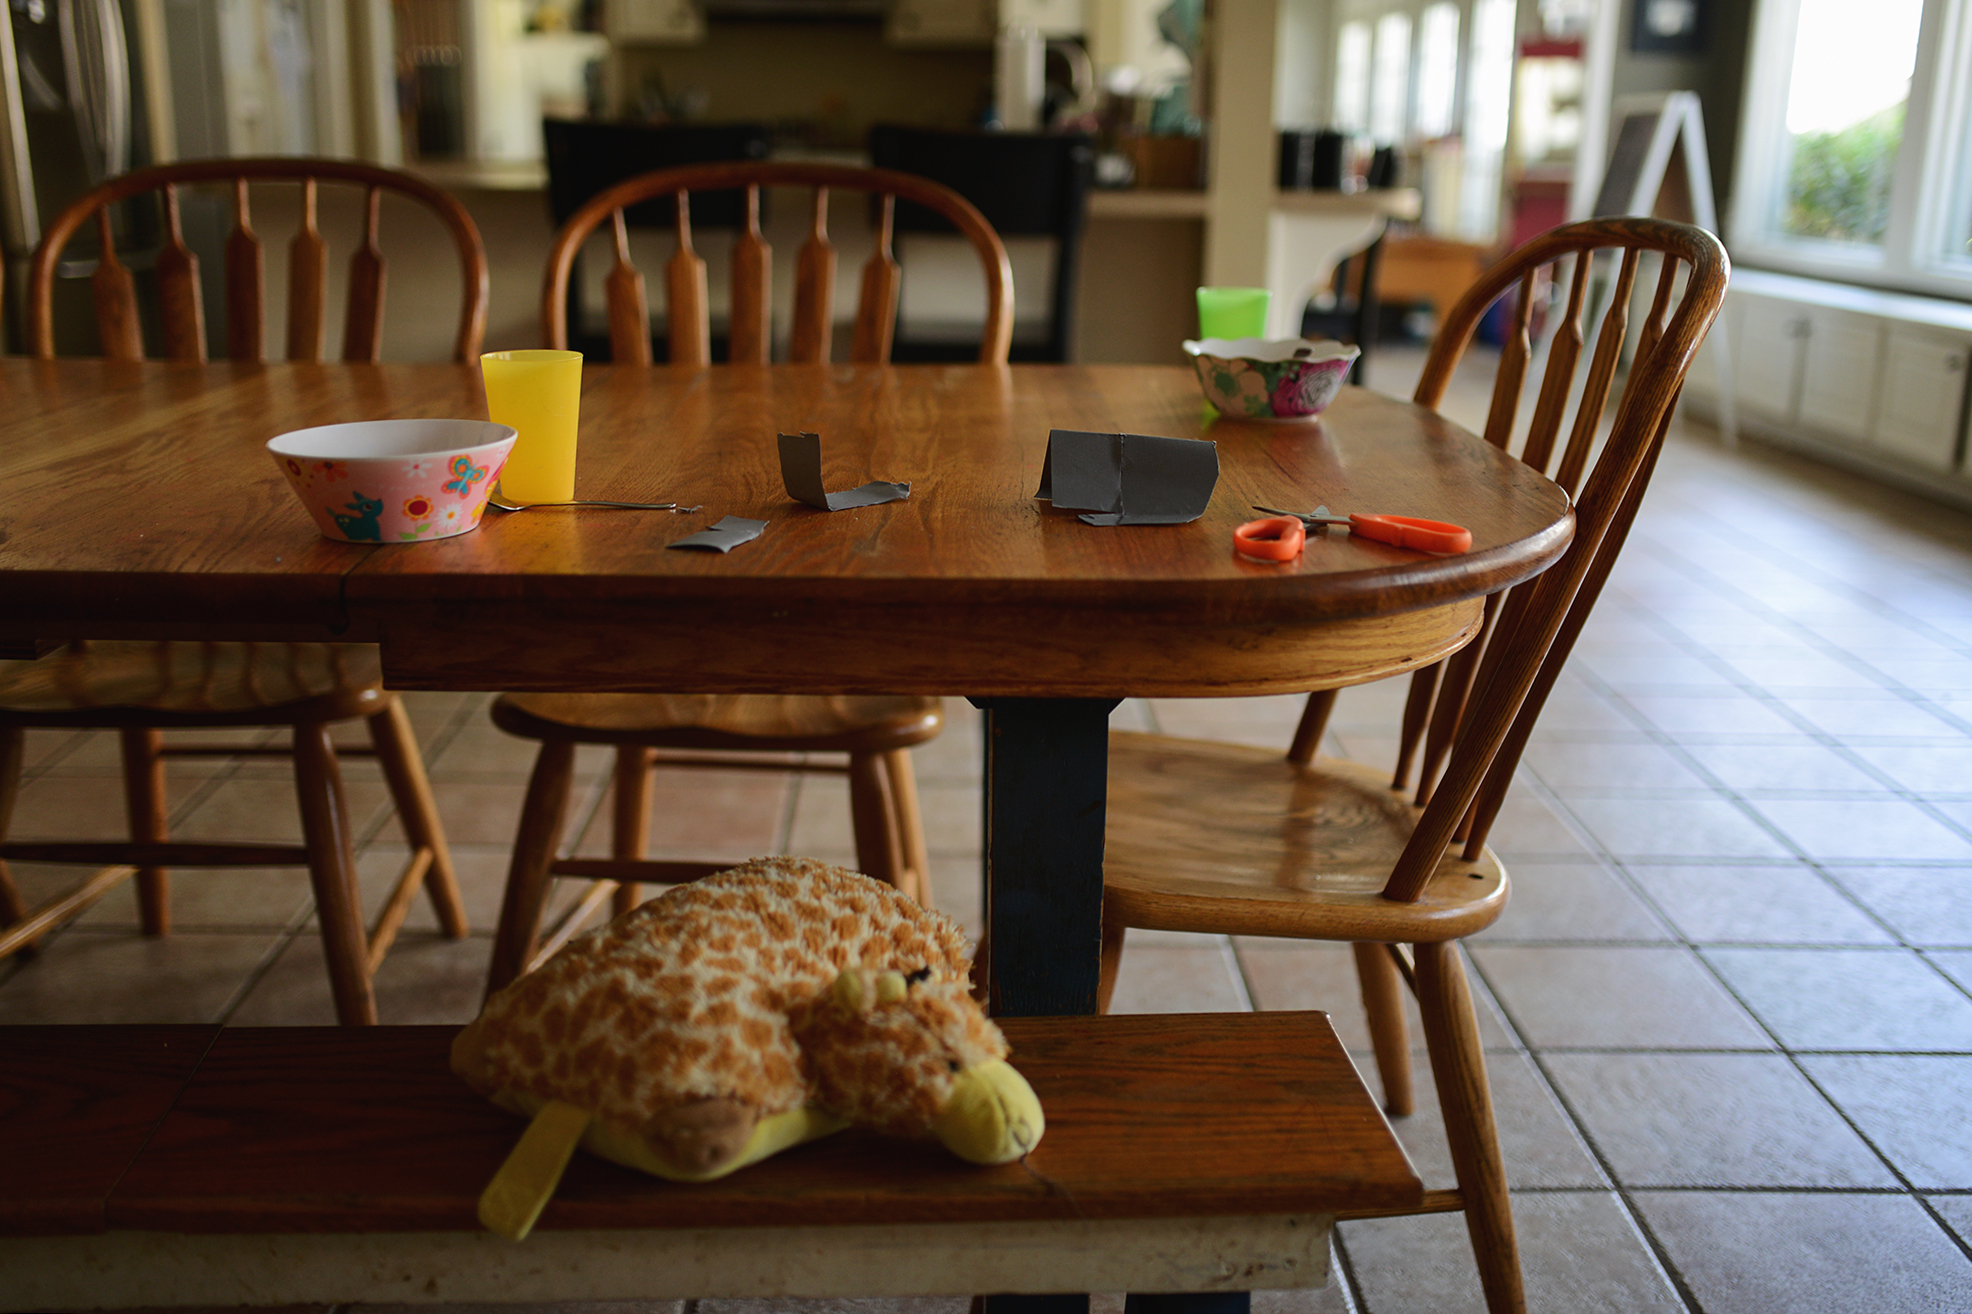 toys, dishes and crafts left at table - Documentary Family Photography